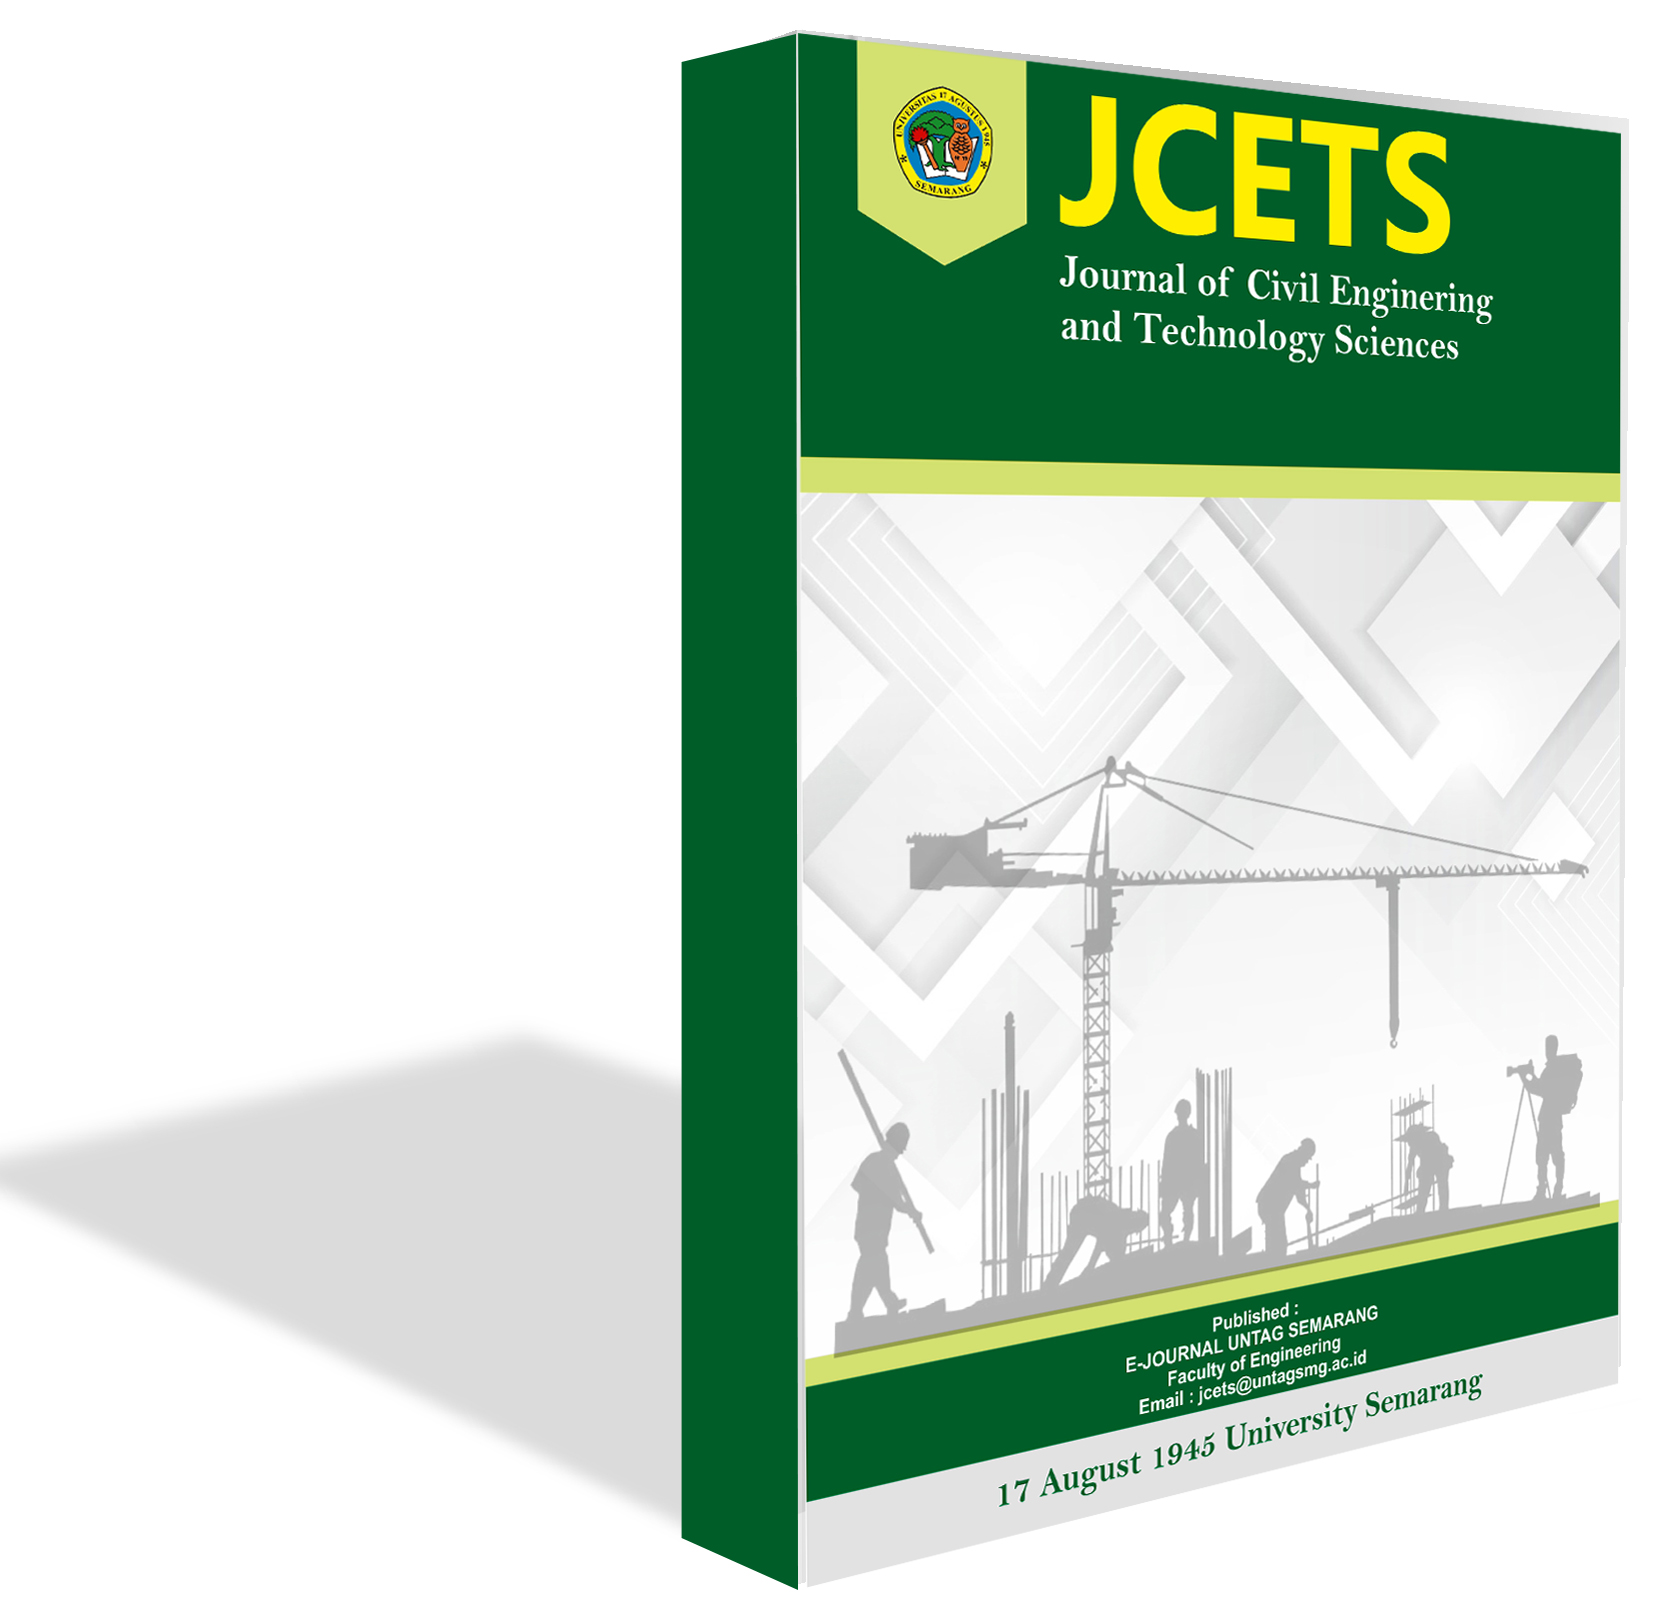 Journal of Civil Engineering and Technology Sciences